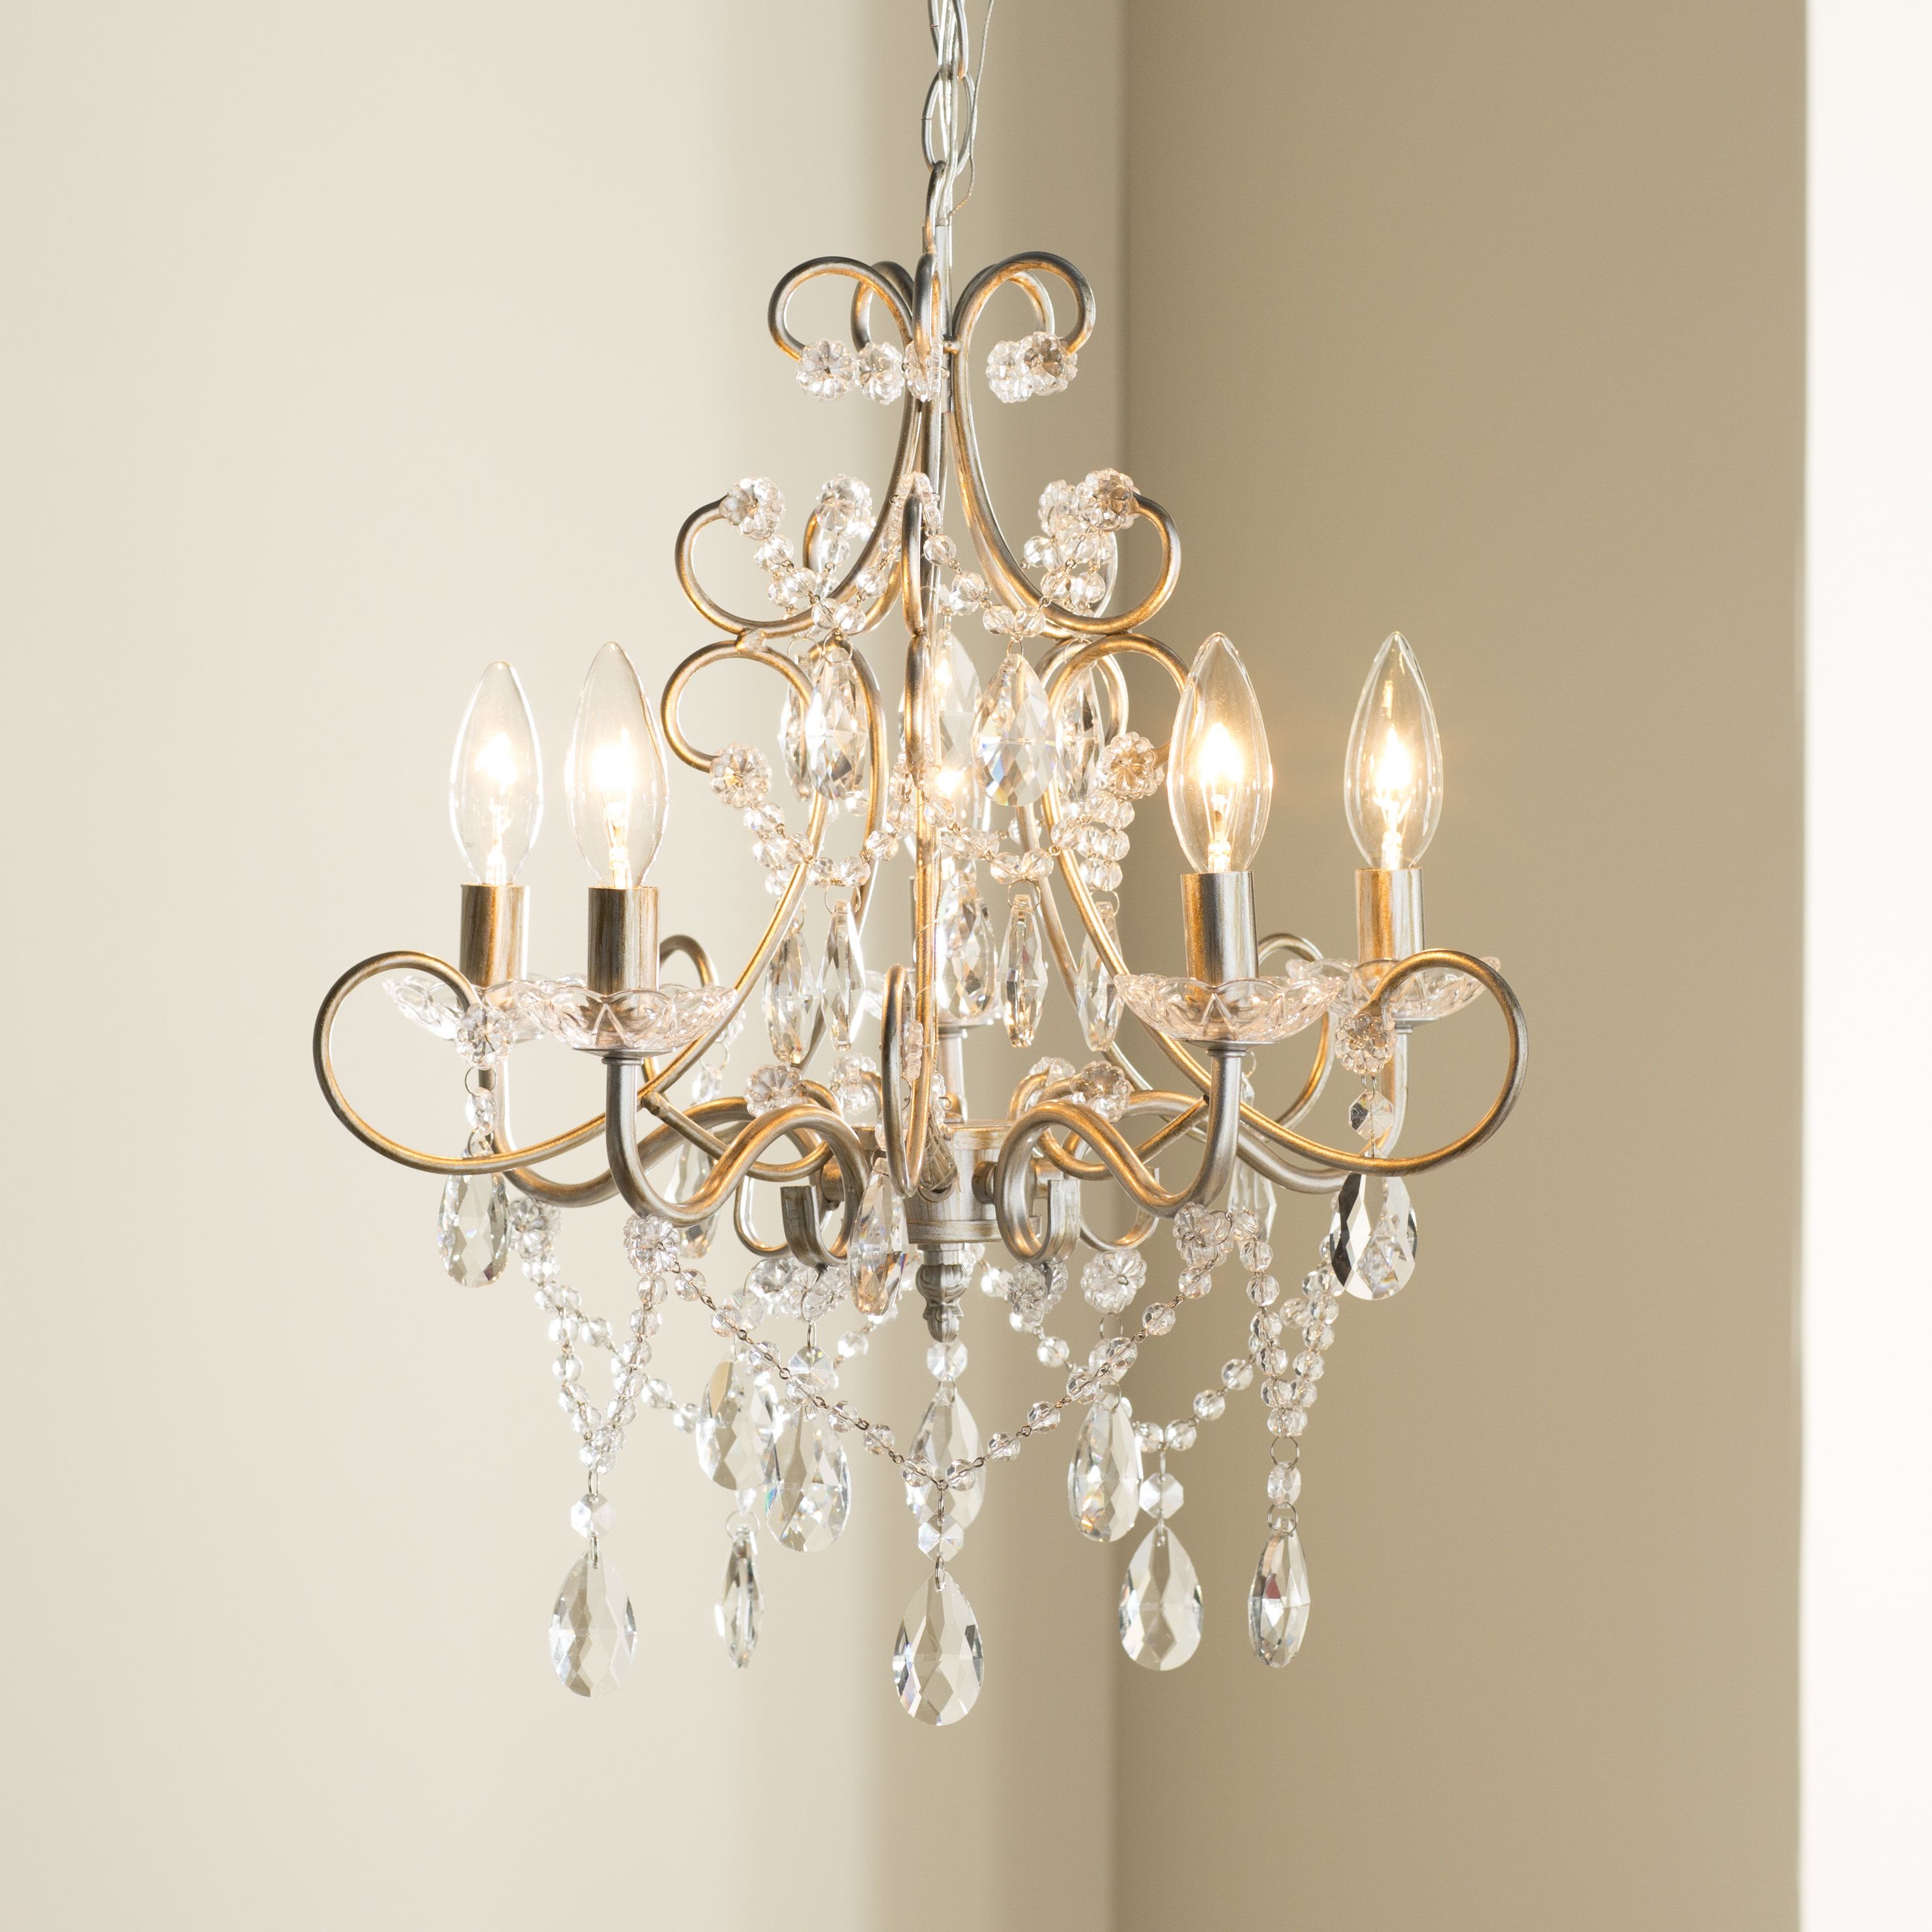 Blanchette 5 Light Candle Style Chandelier For Blanchette 5 Light Candle Style Chandeliers (Photo 2 of 30)